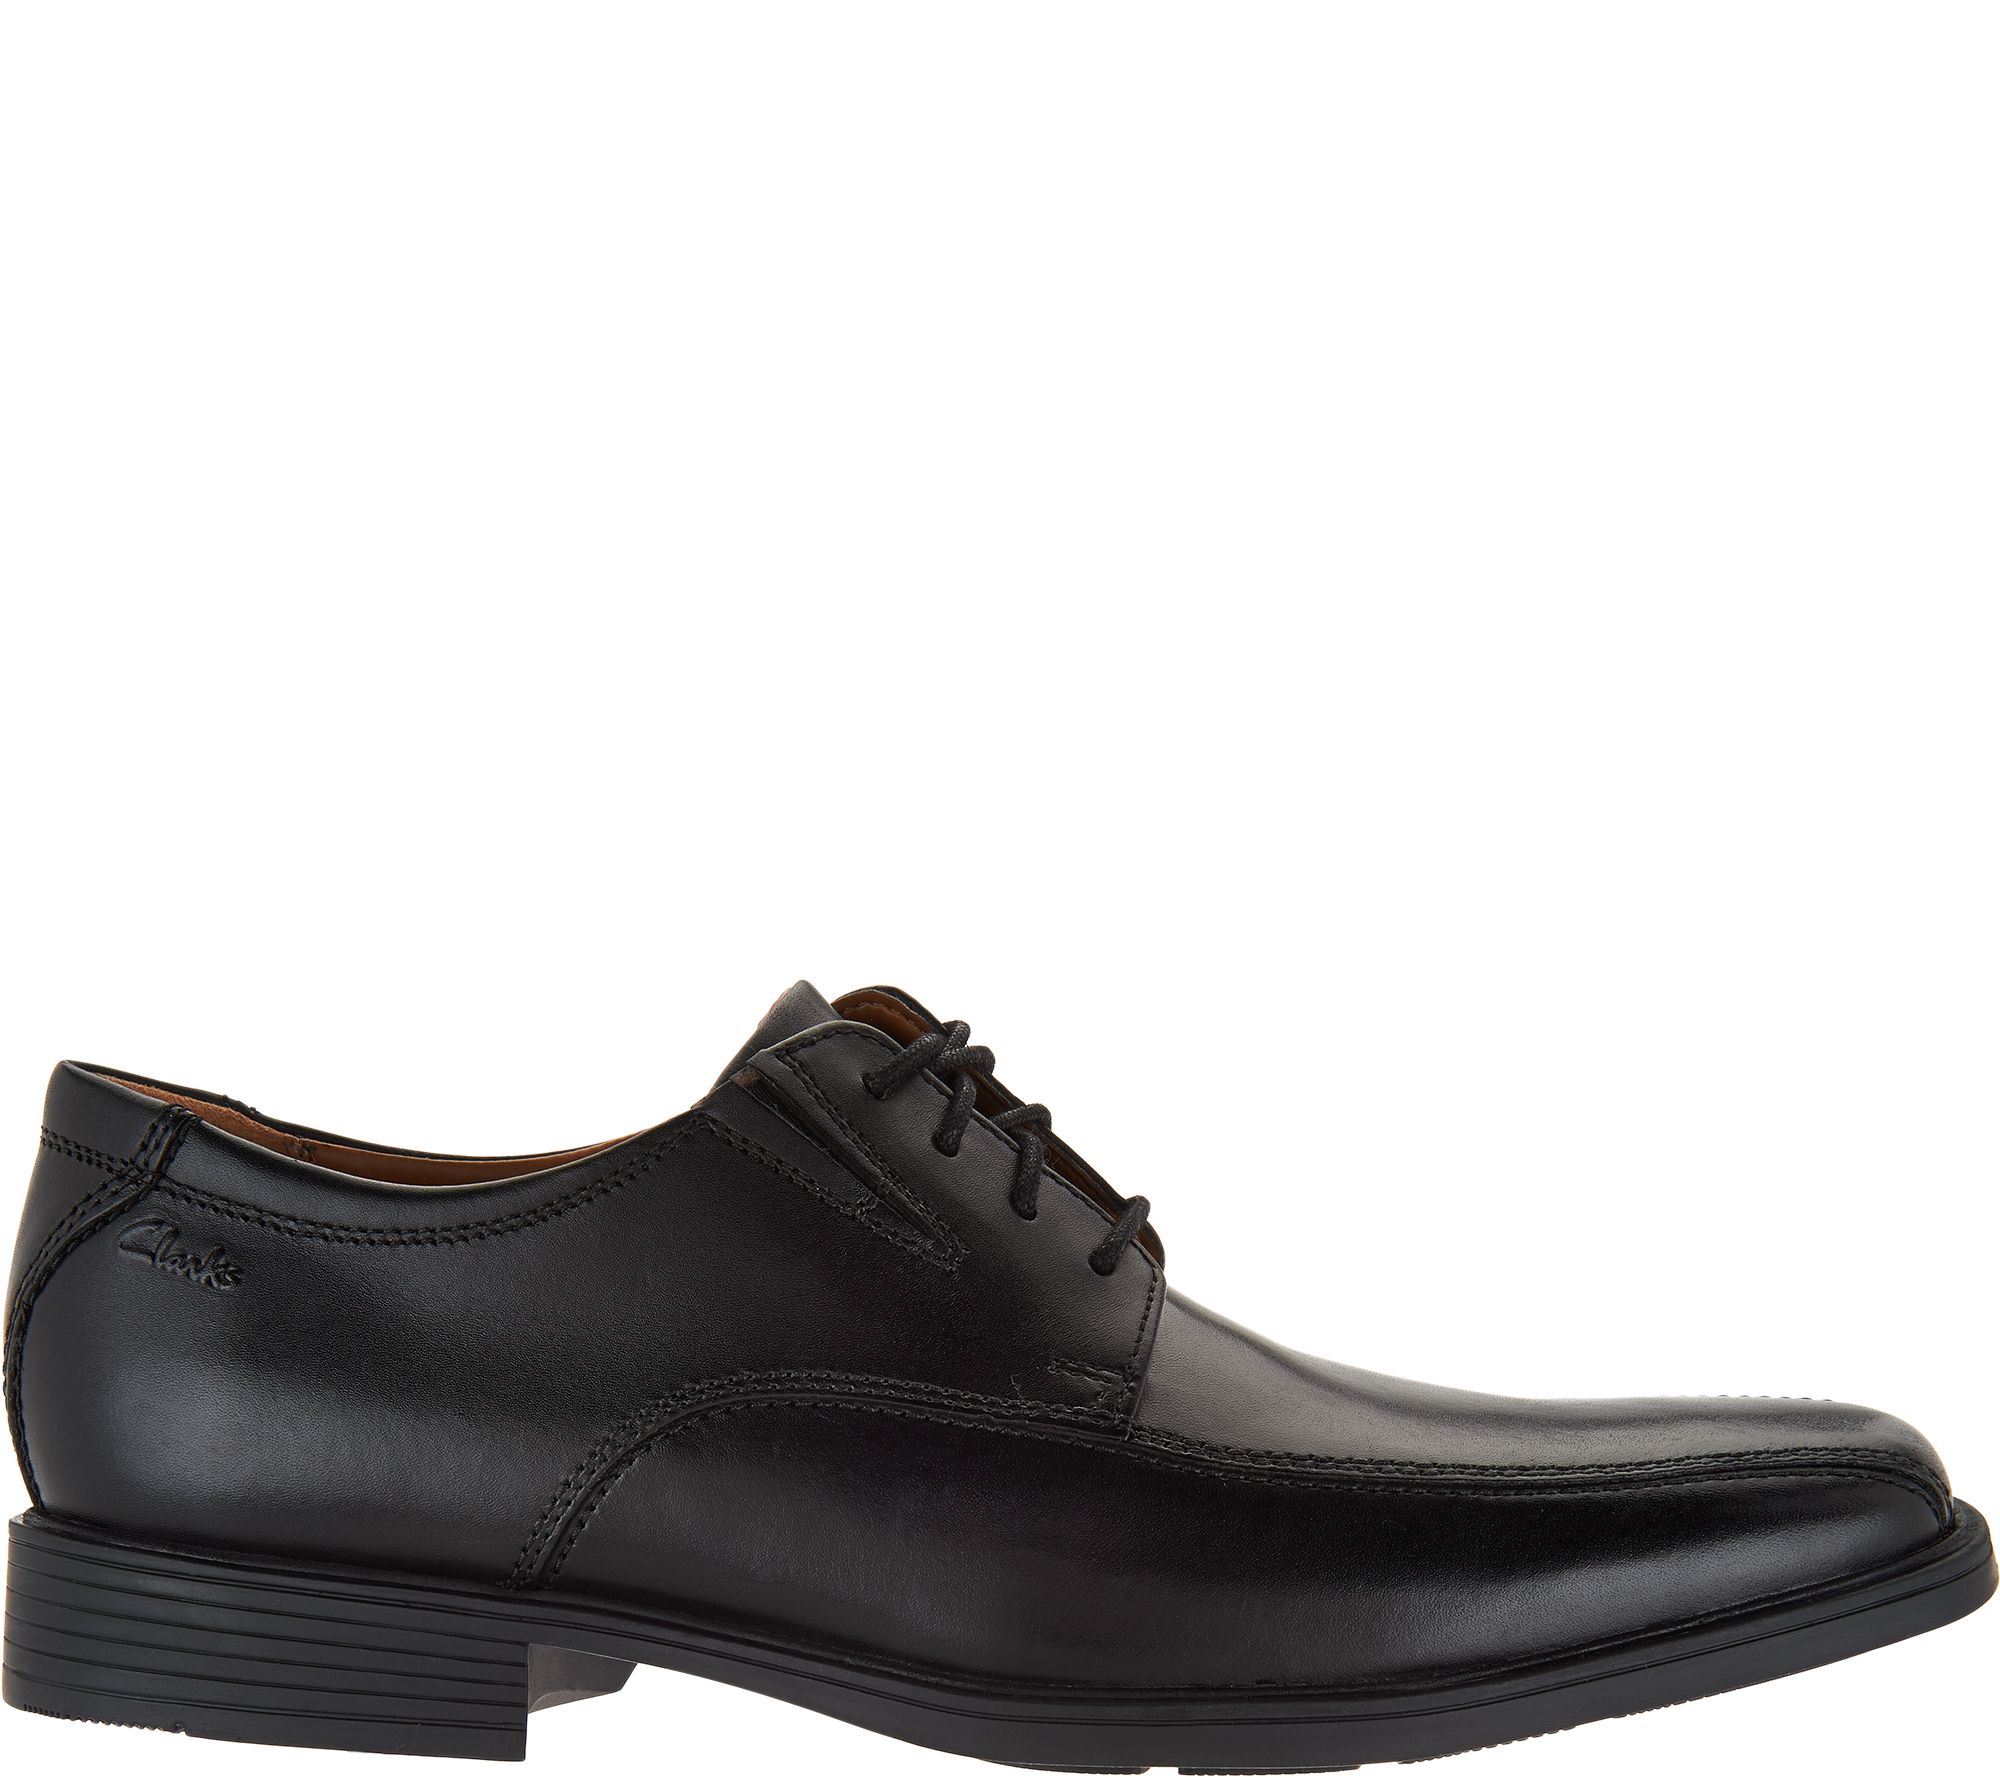 Details about   Mens Clarks Formal Lace Up Shoes Amieson Walk